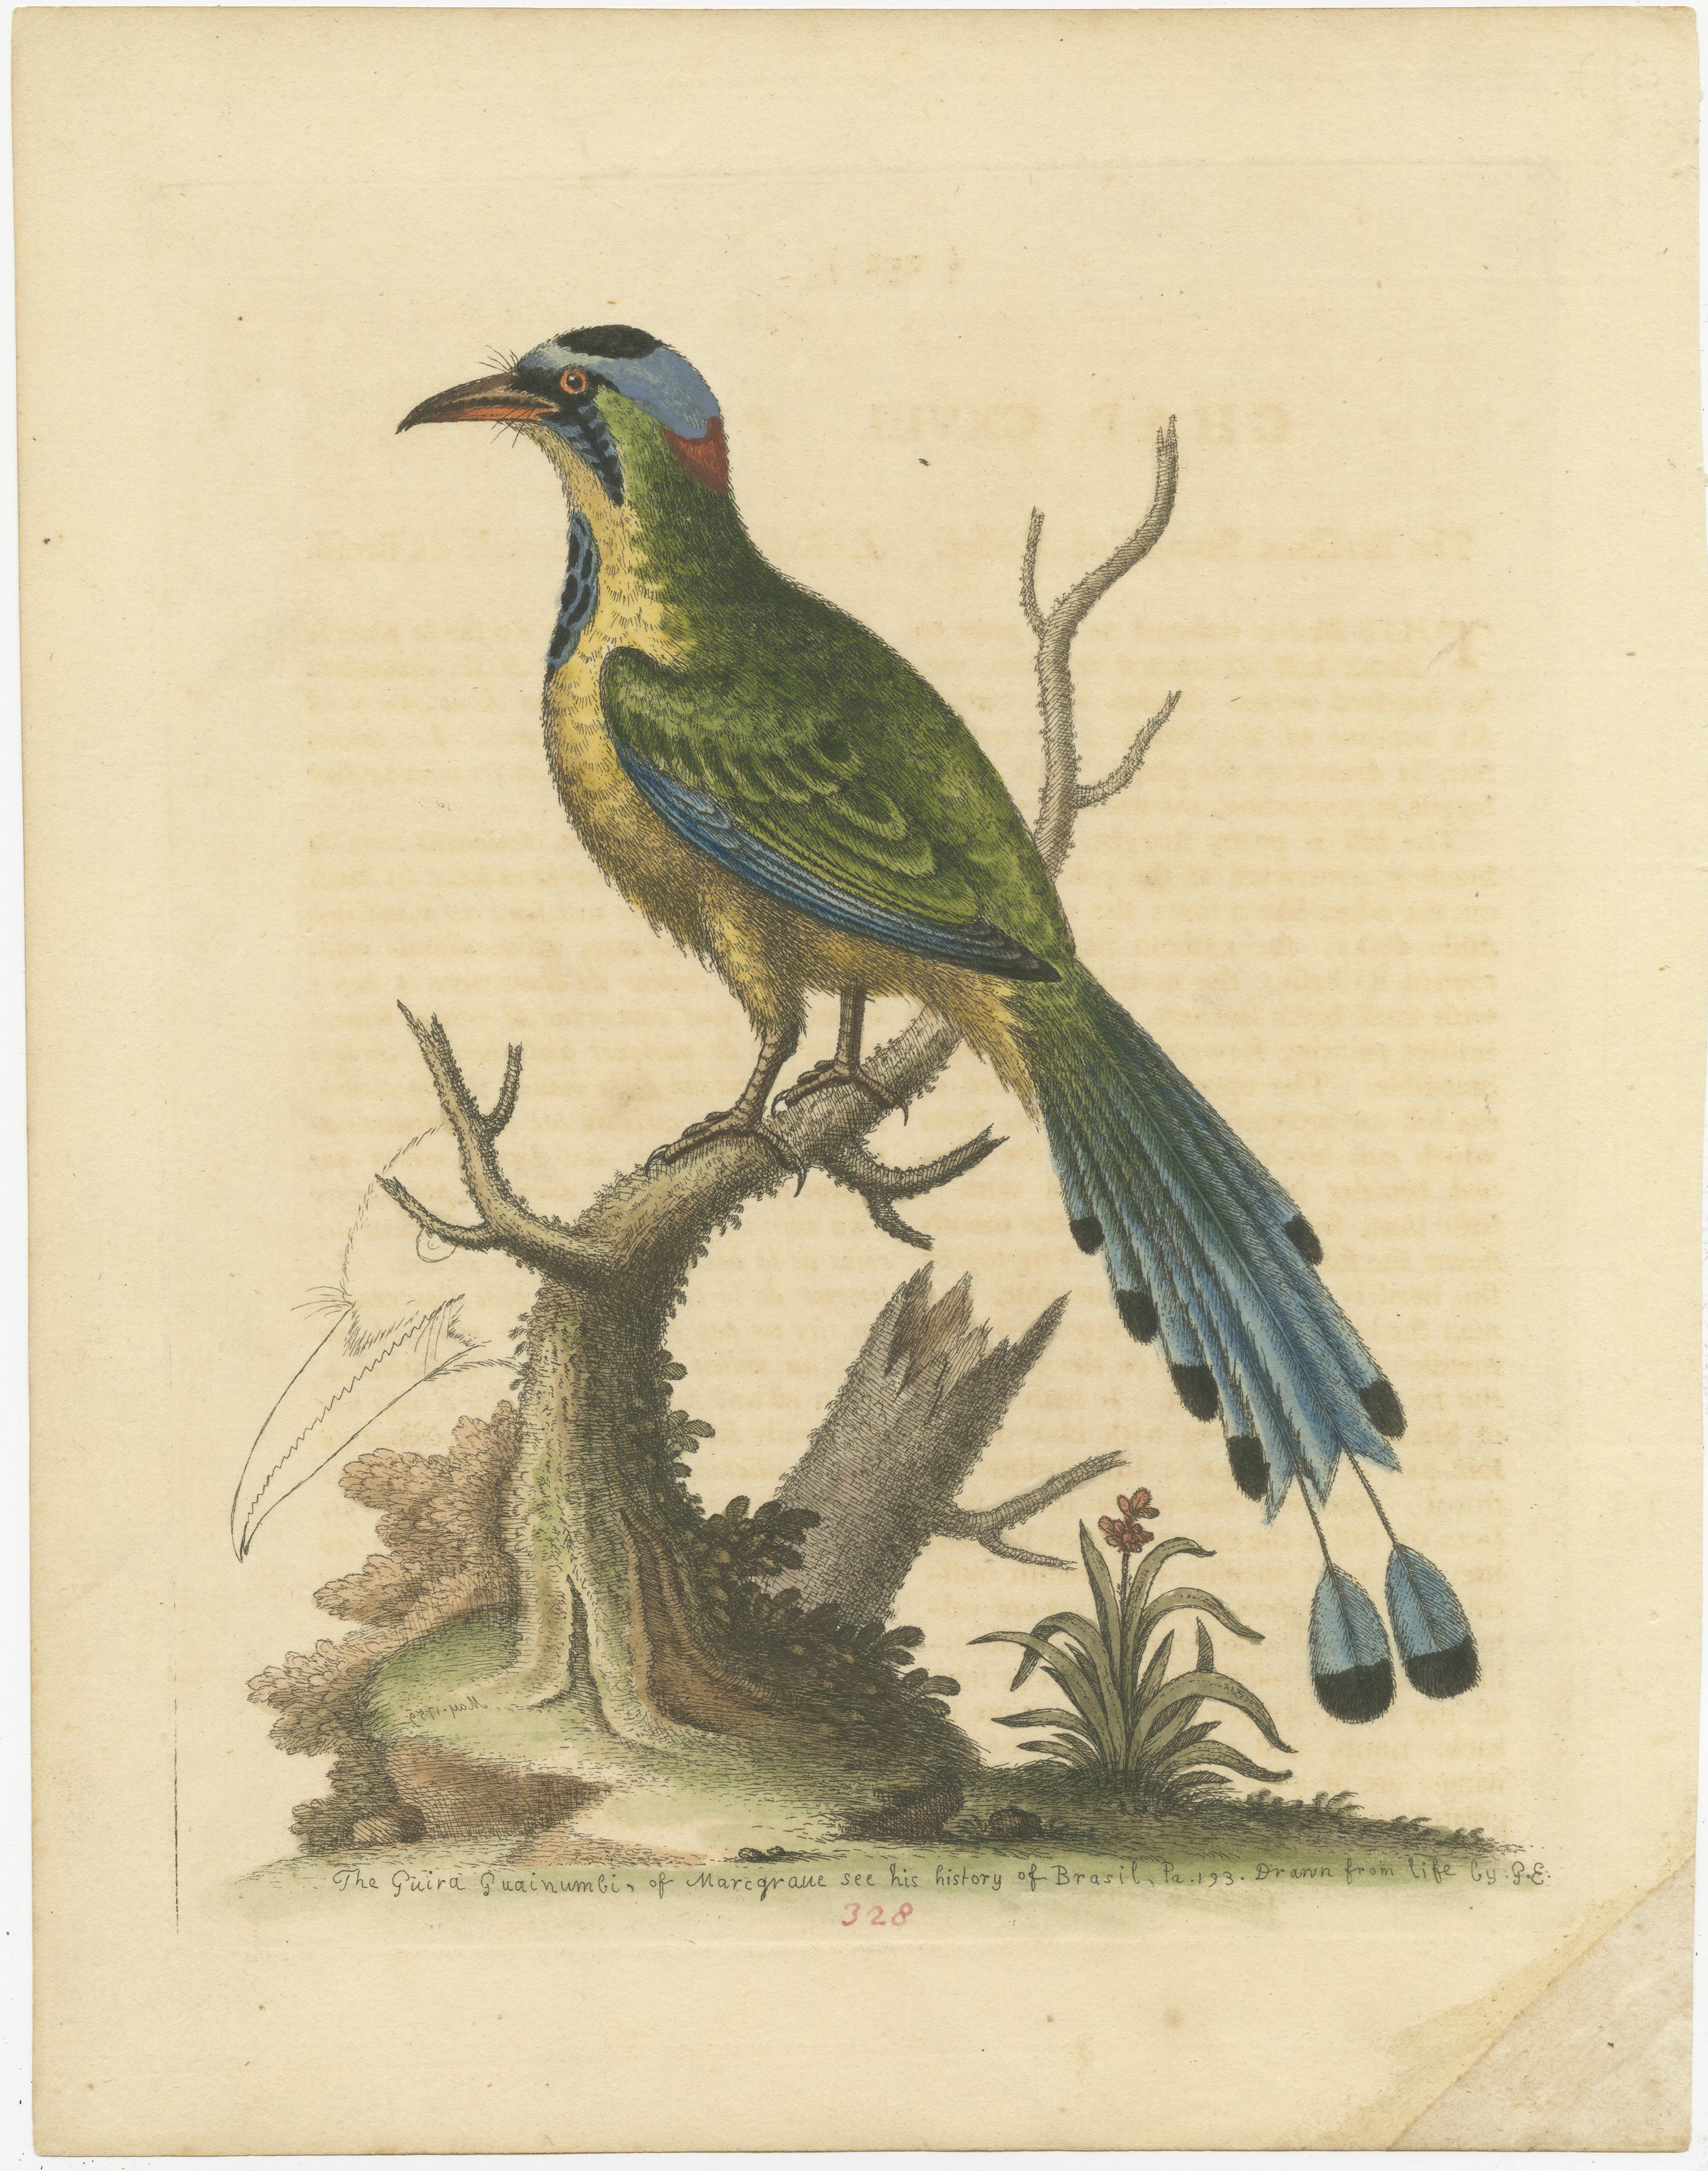 Original antique bird print of the Brasilian Saw-Billed Roller, Guira Guainumbi. Published by by George Edwards, circa 1760. 

George Edwards FRS (3 April 1694 – 23 July 1773) was an English naturalist and ornithologist, known as the 